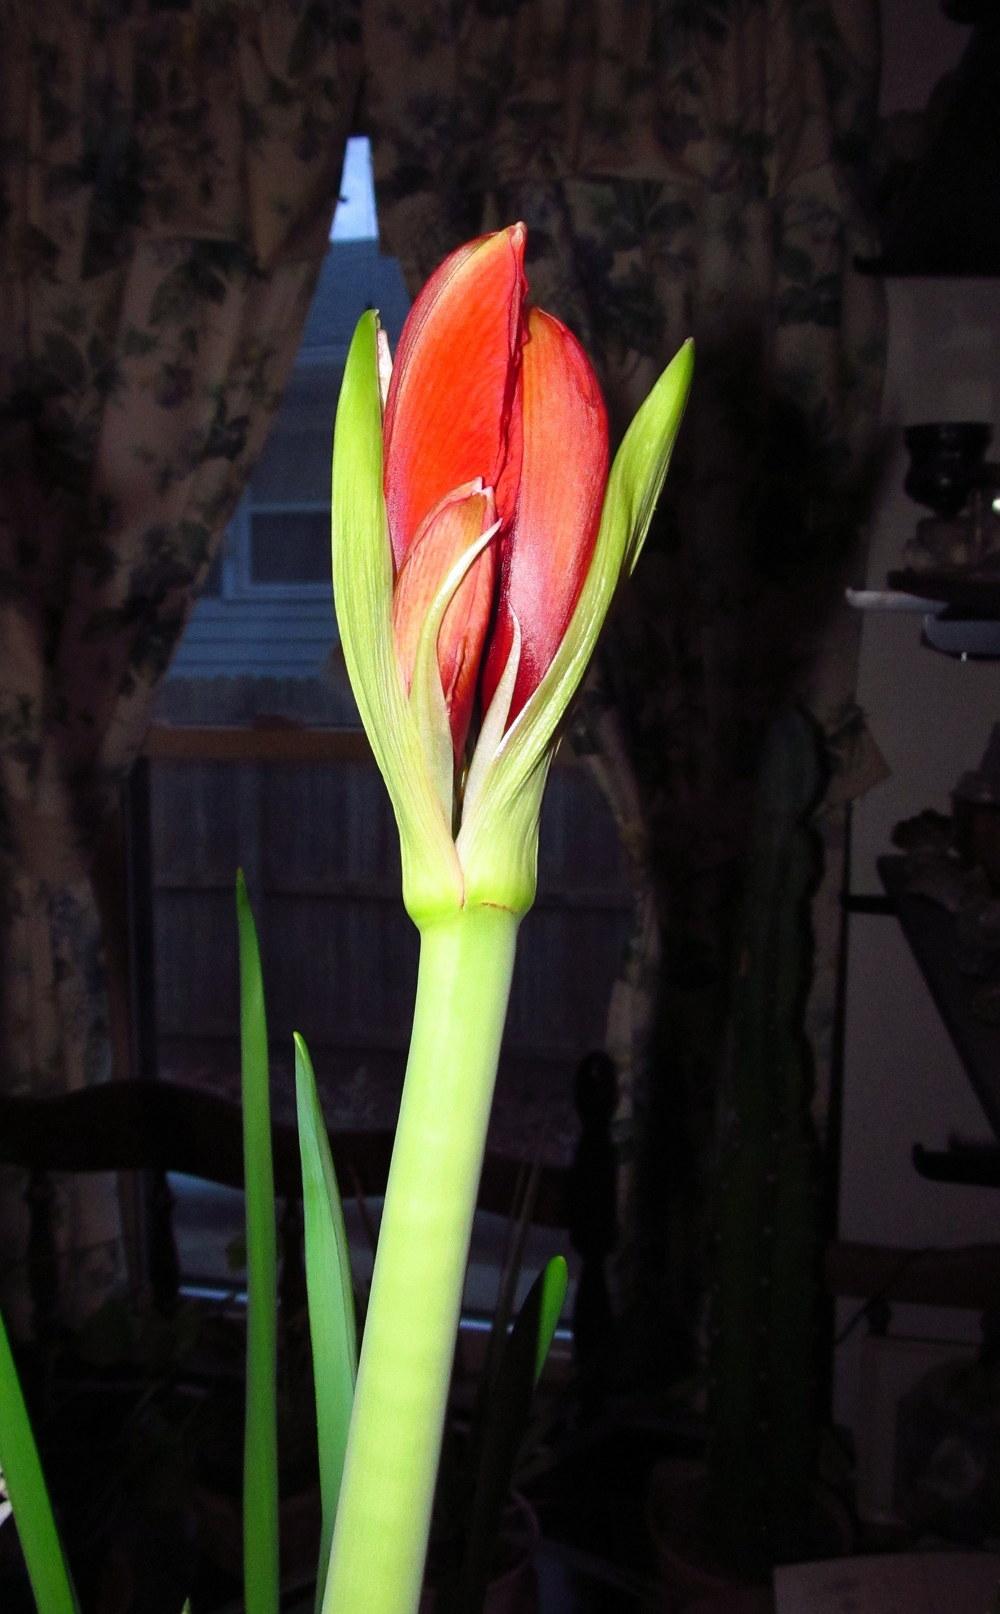 Photo of Amaryllis (Hippeastrum 'Red Lion') uploaded by jmorth